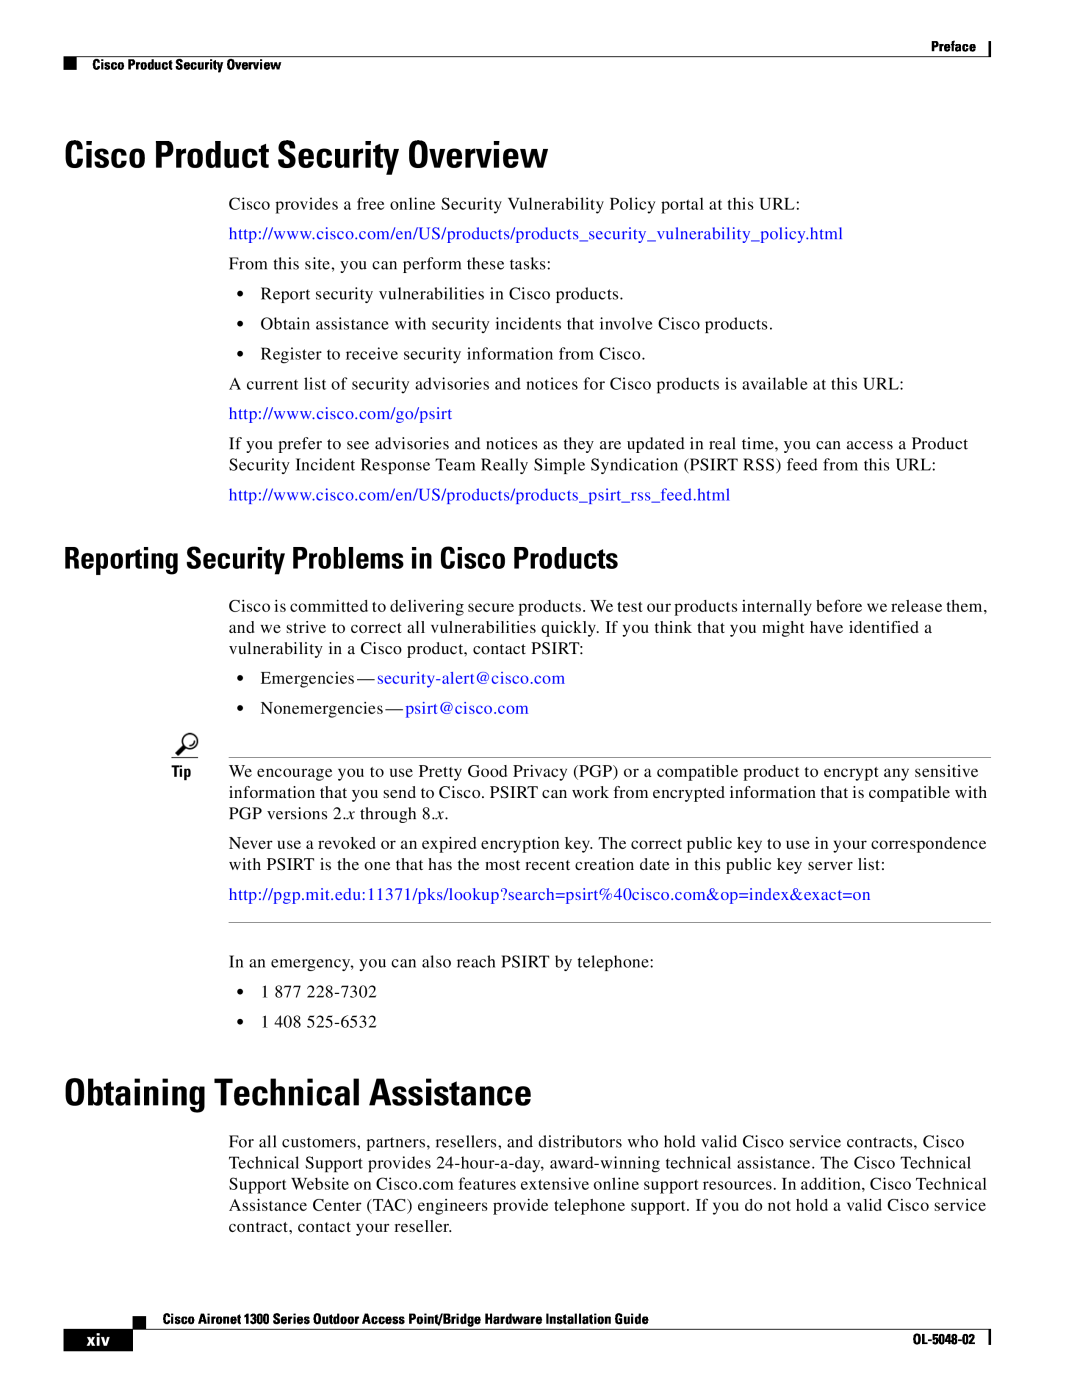 Cisco Systems 1300 Series manual Cisco Product Security Overview, Obtaining Technical Assistance 